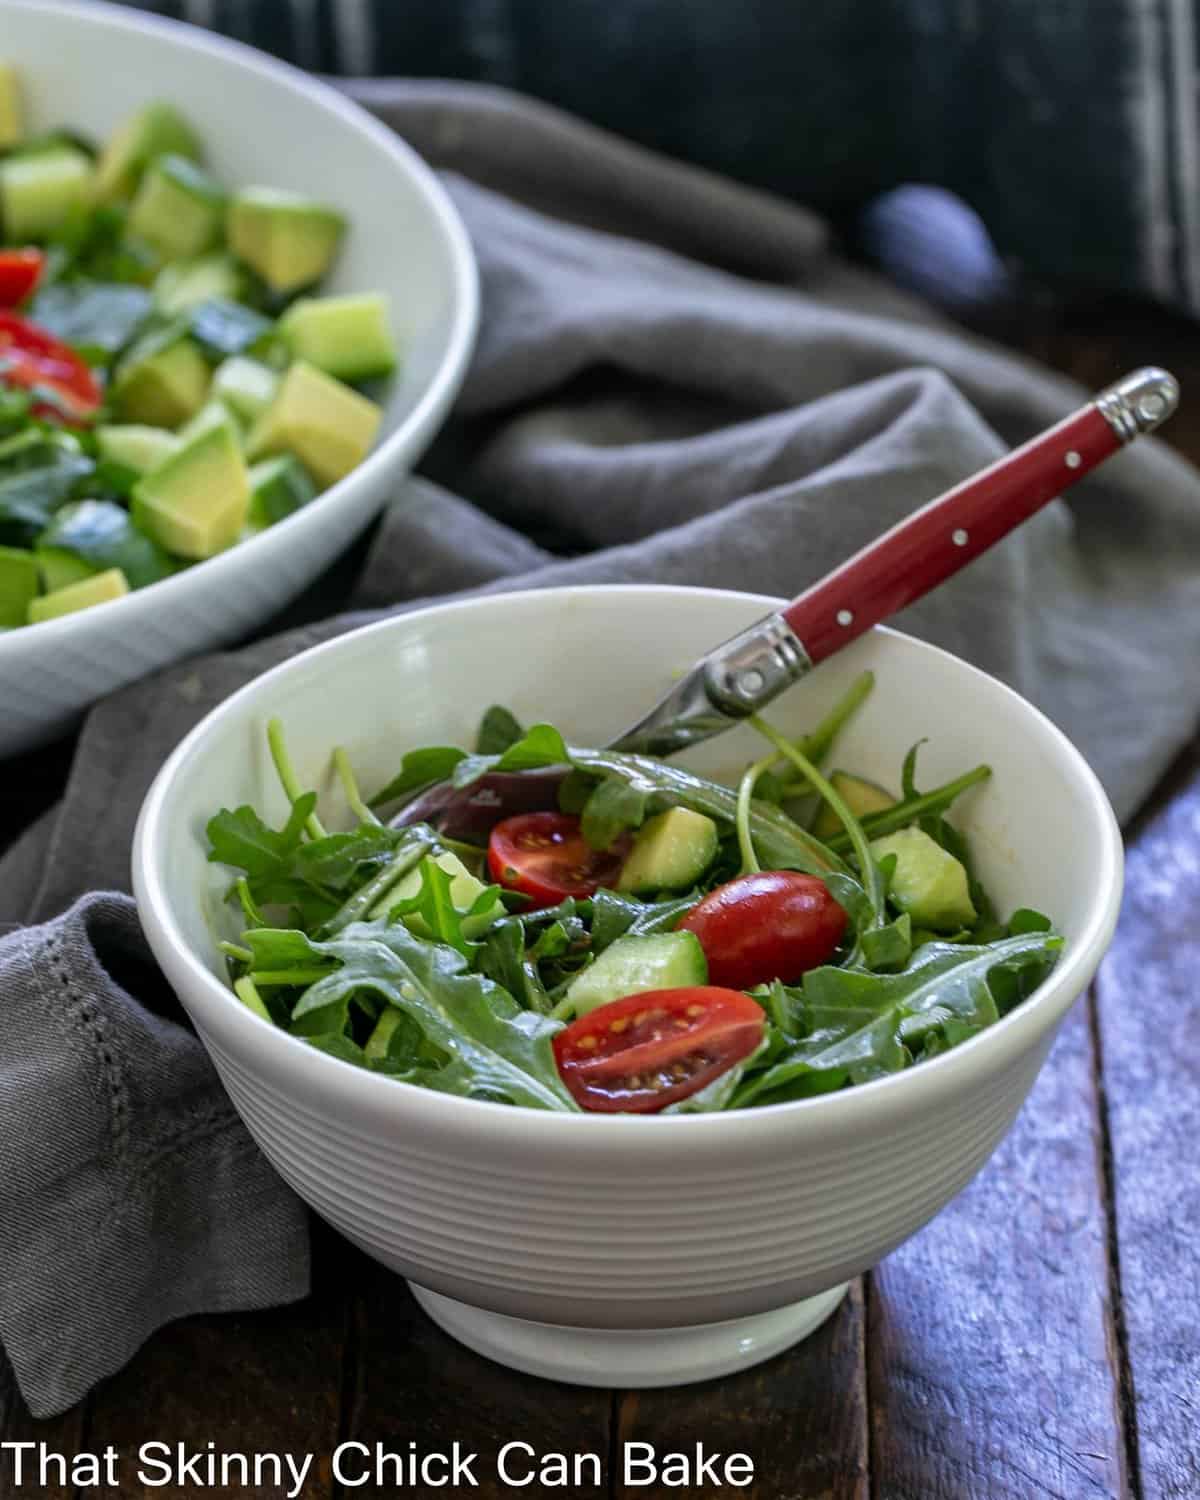 Salad bowl with arugula salad and a red handle fork in front of serving bowl.